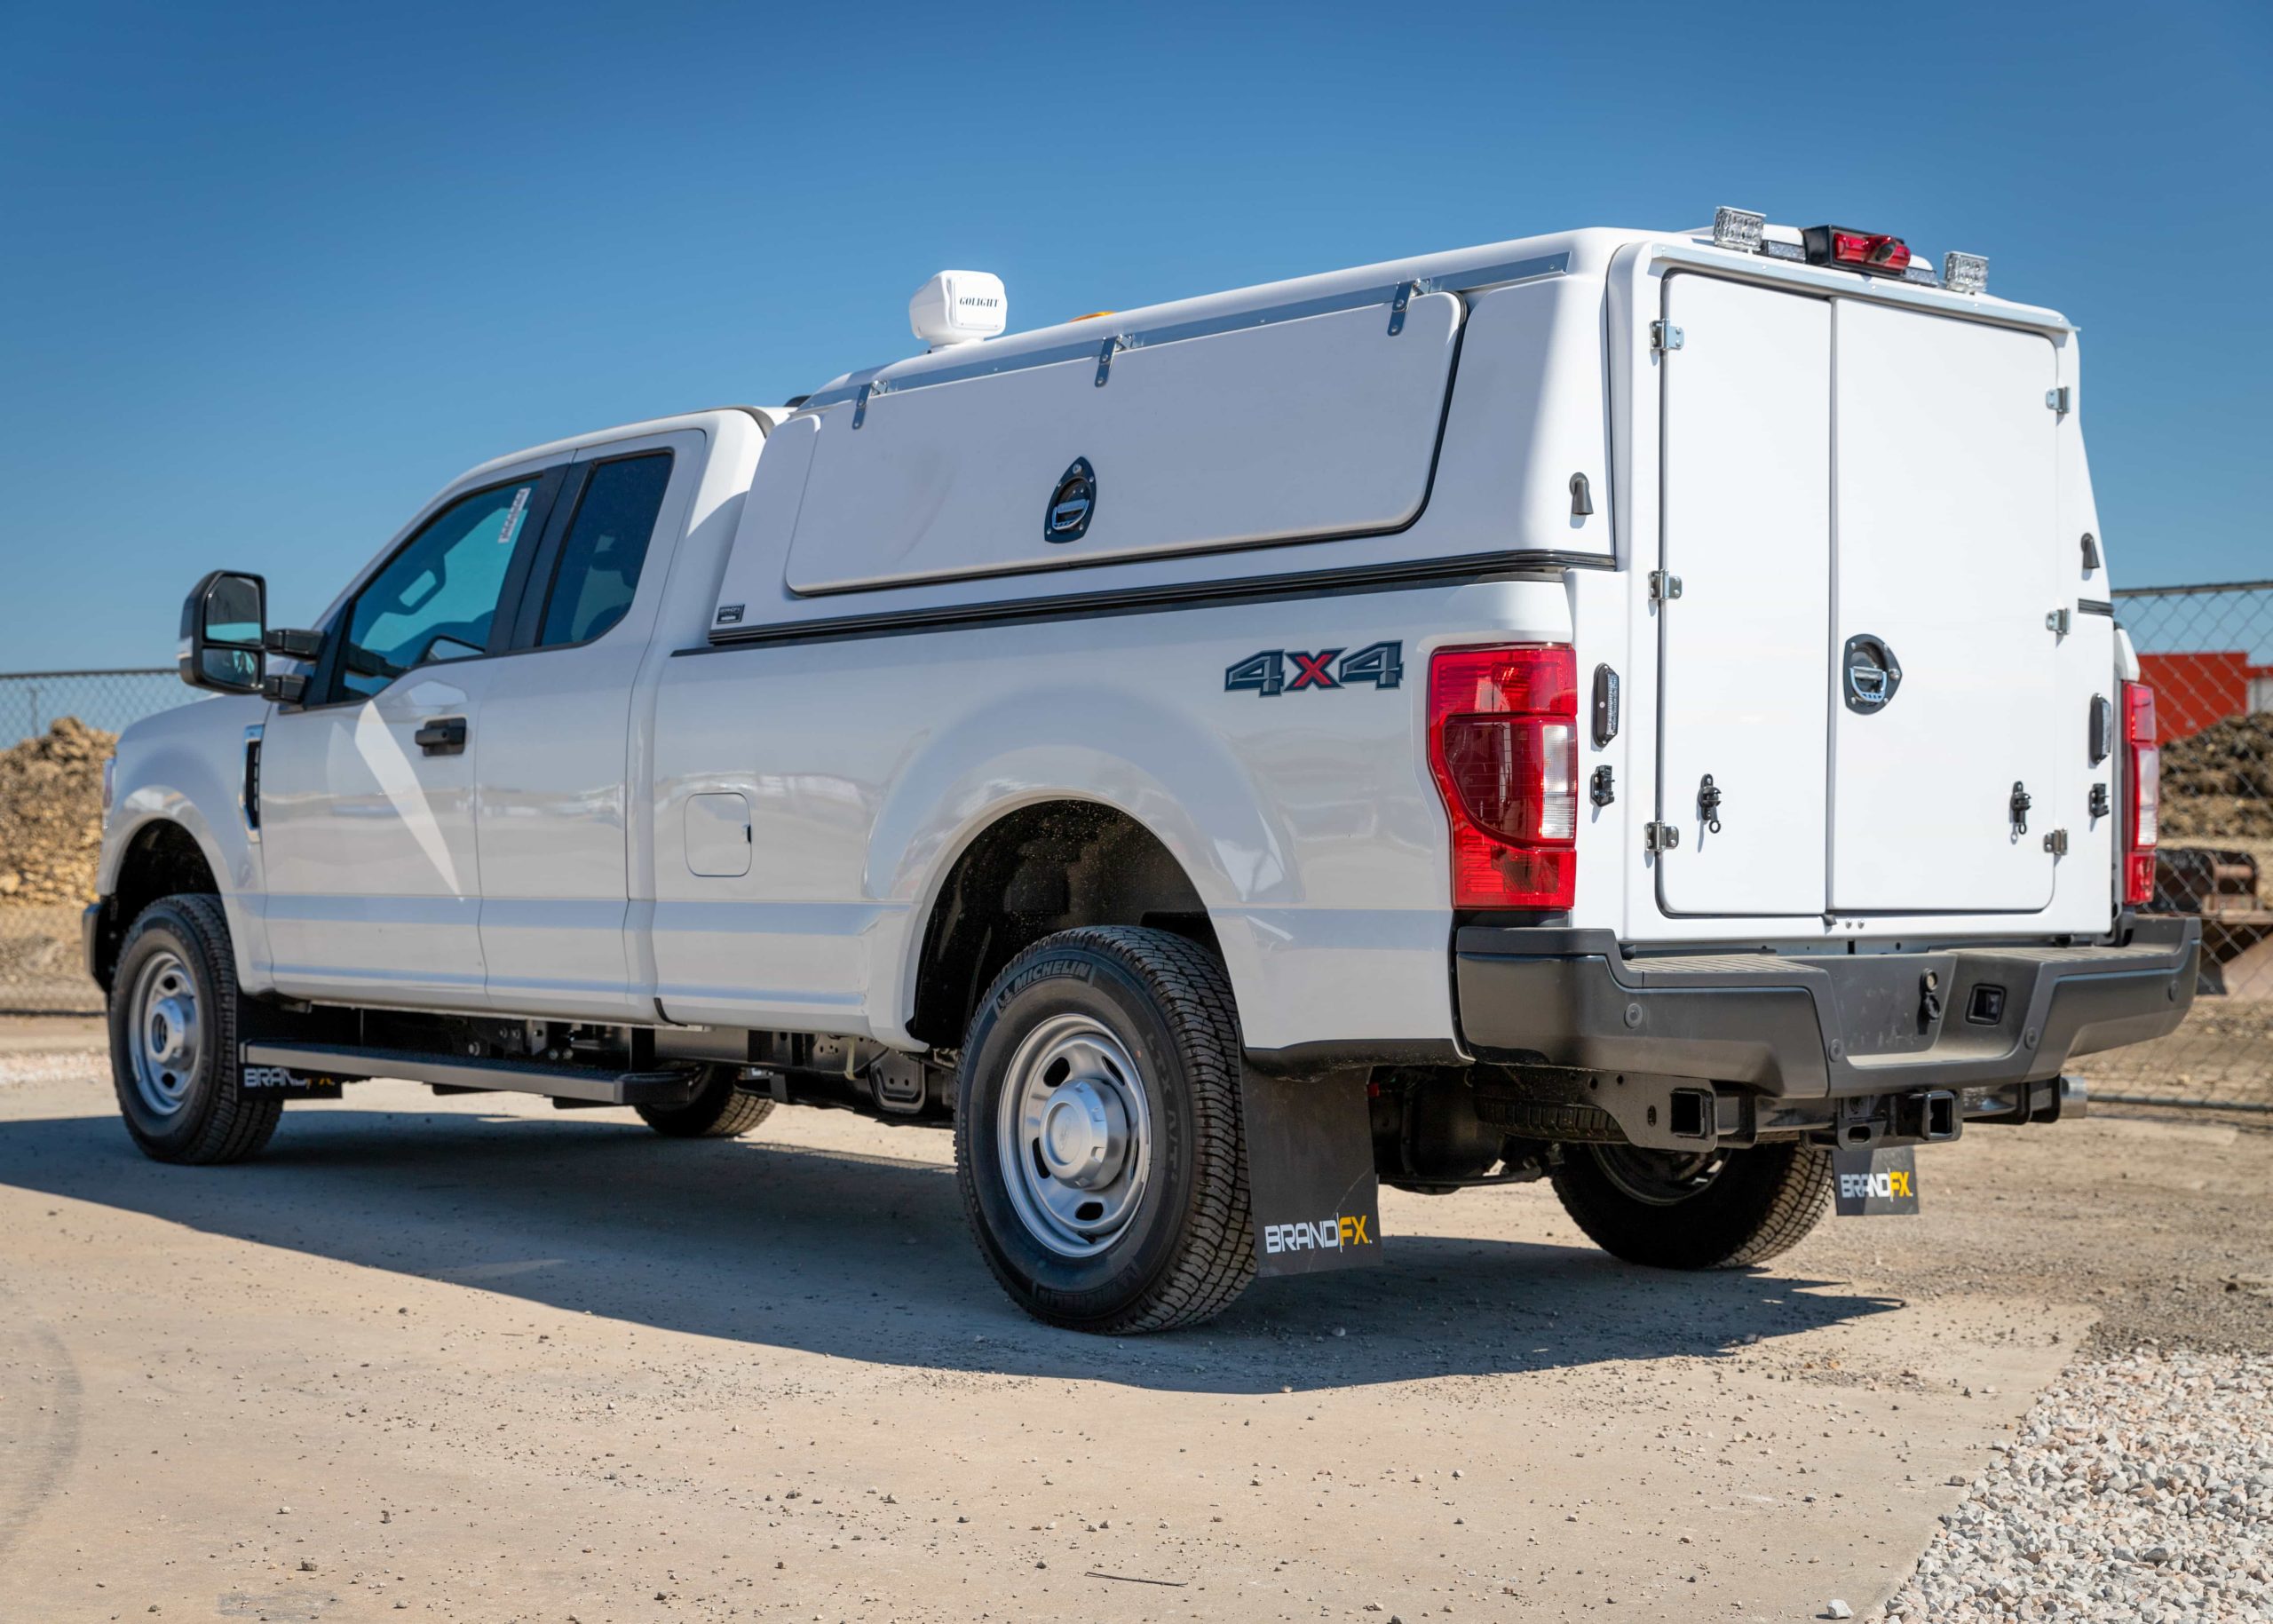 Truck Bodies & WorkPods™ Built By BrandFX Help Fleets Maintain a Clean & Professional Image